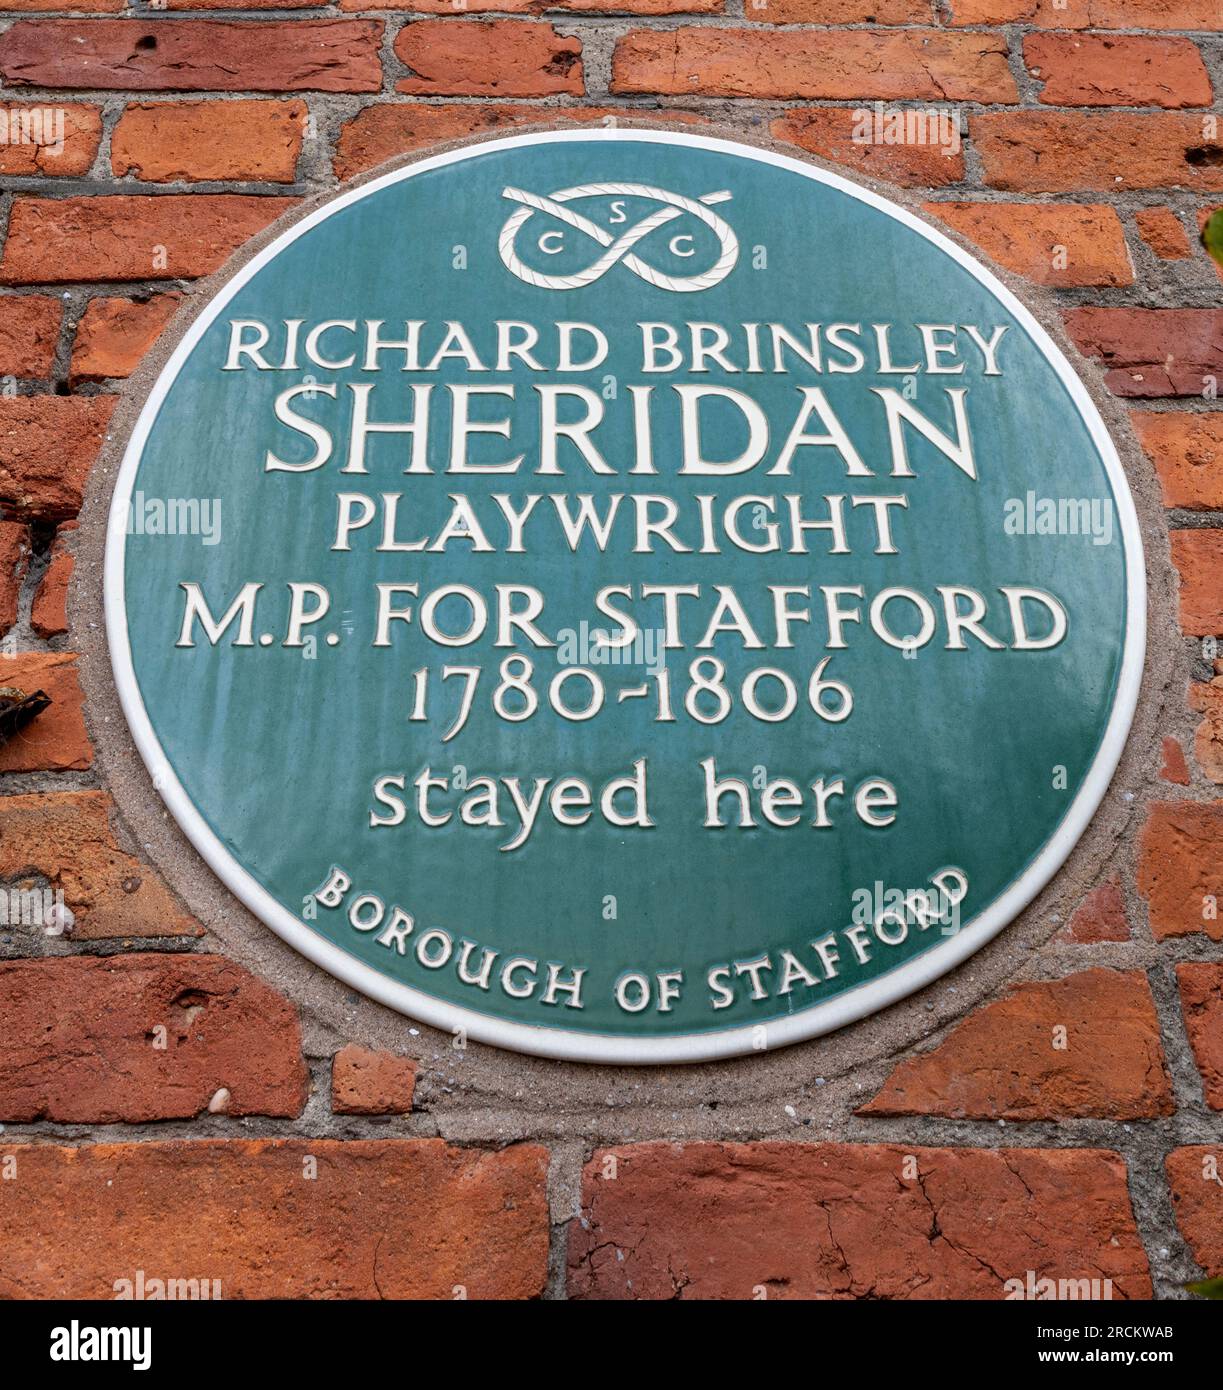 Green heritage plaque at The Post House, Stafford, Staffordshire, commemorating that Richard Brinsley Sheridan MP for Stafford stayed there. Stock Photo